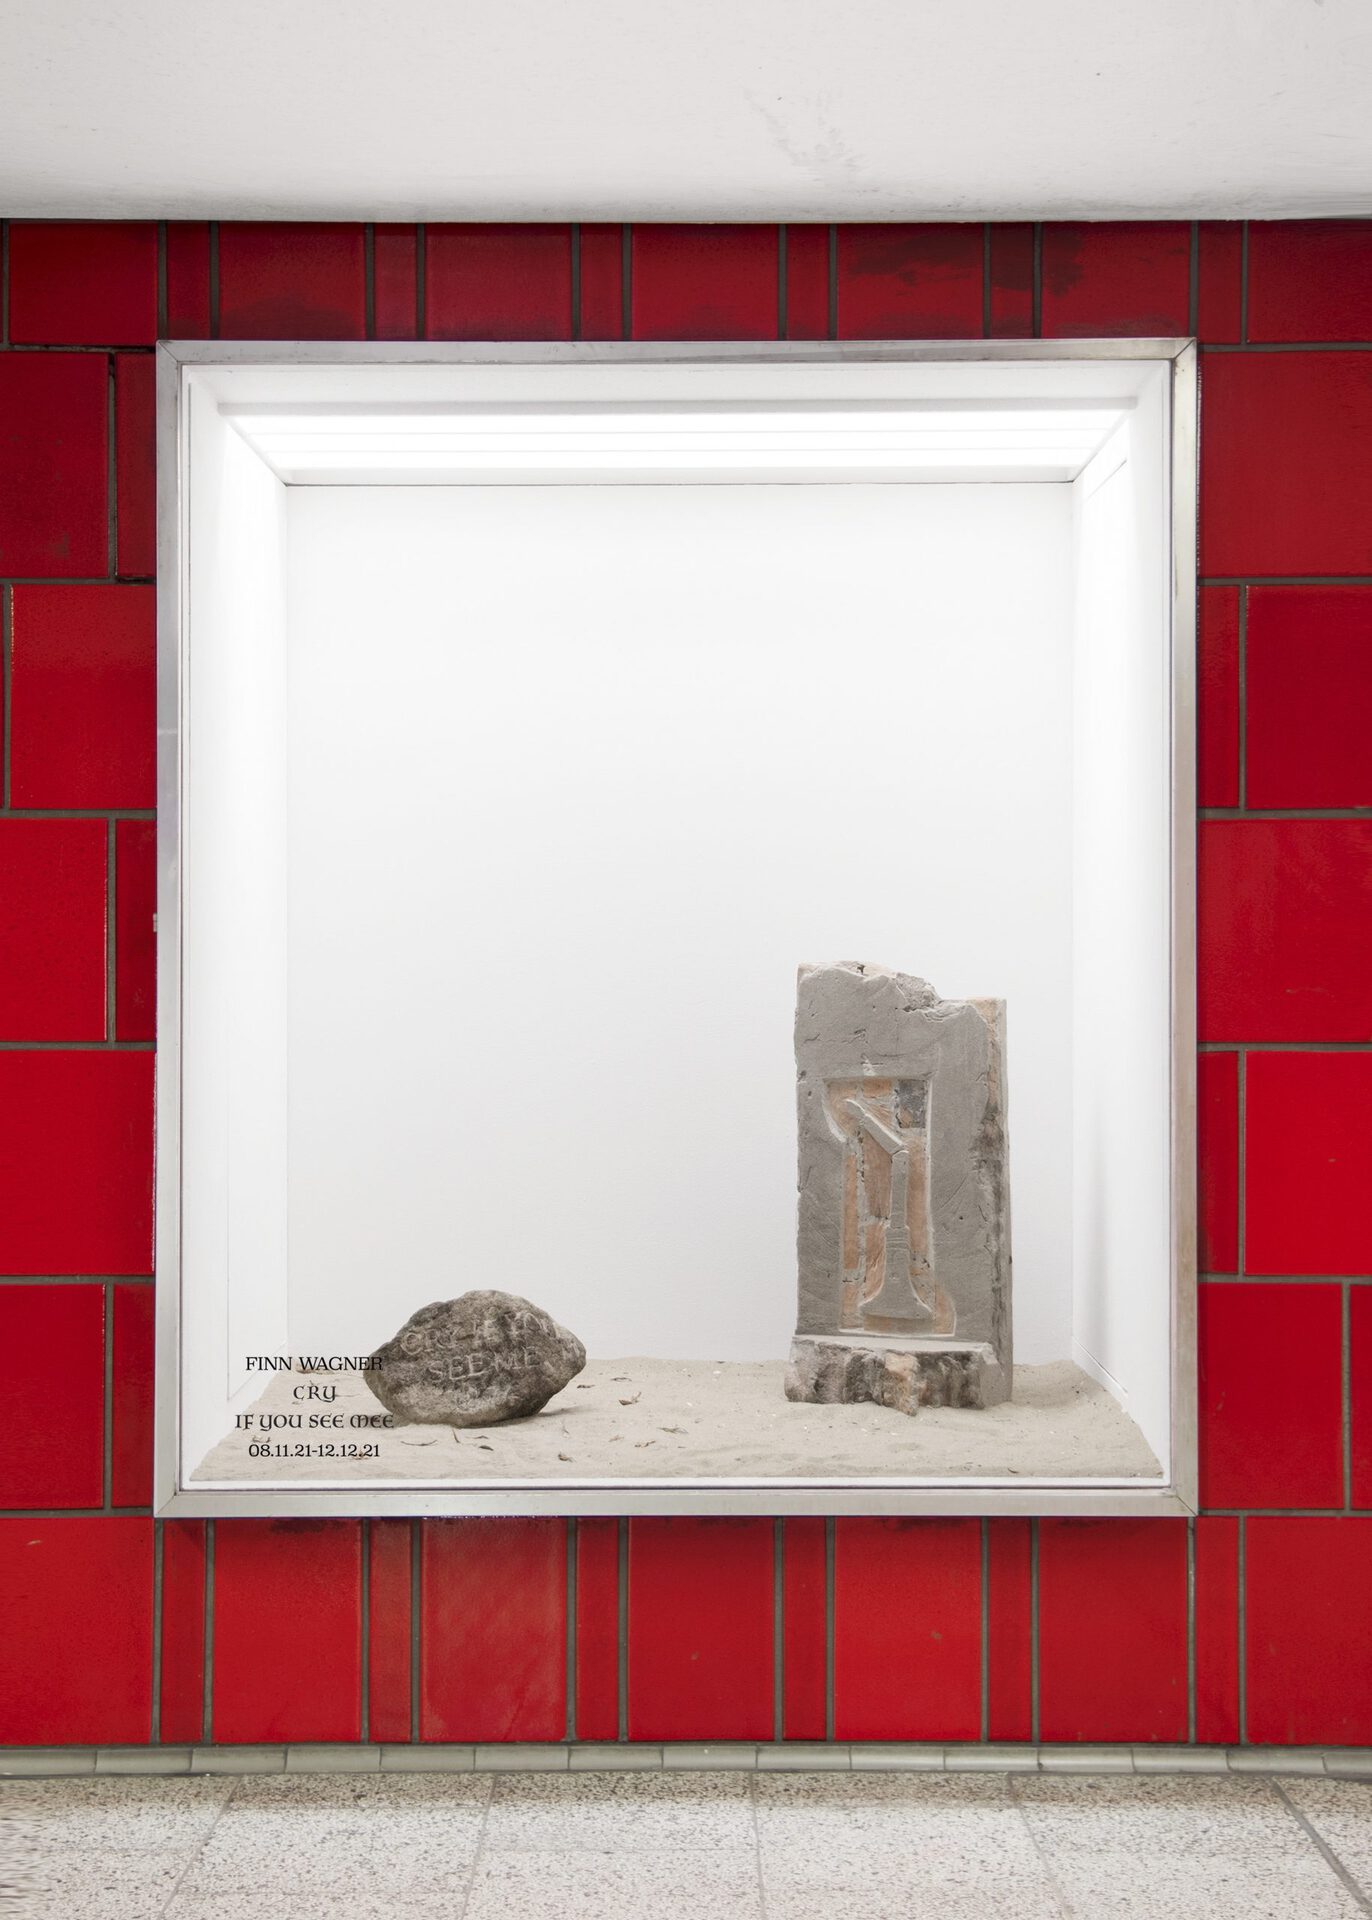 Finn Wagner, cry if you see me, 2021, stone, ww2 bunker wall, sand, 180x160x90cm